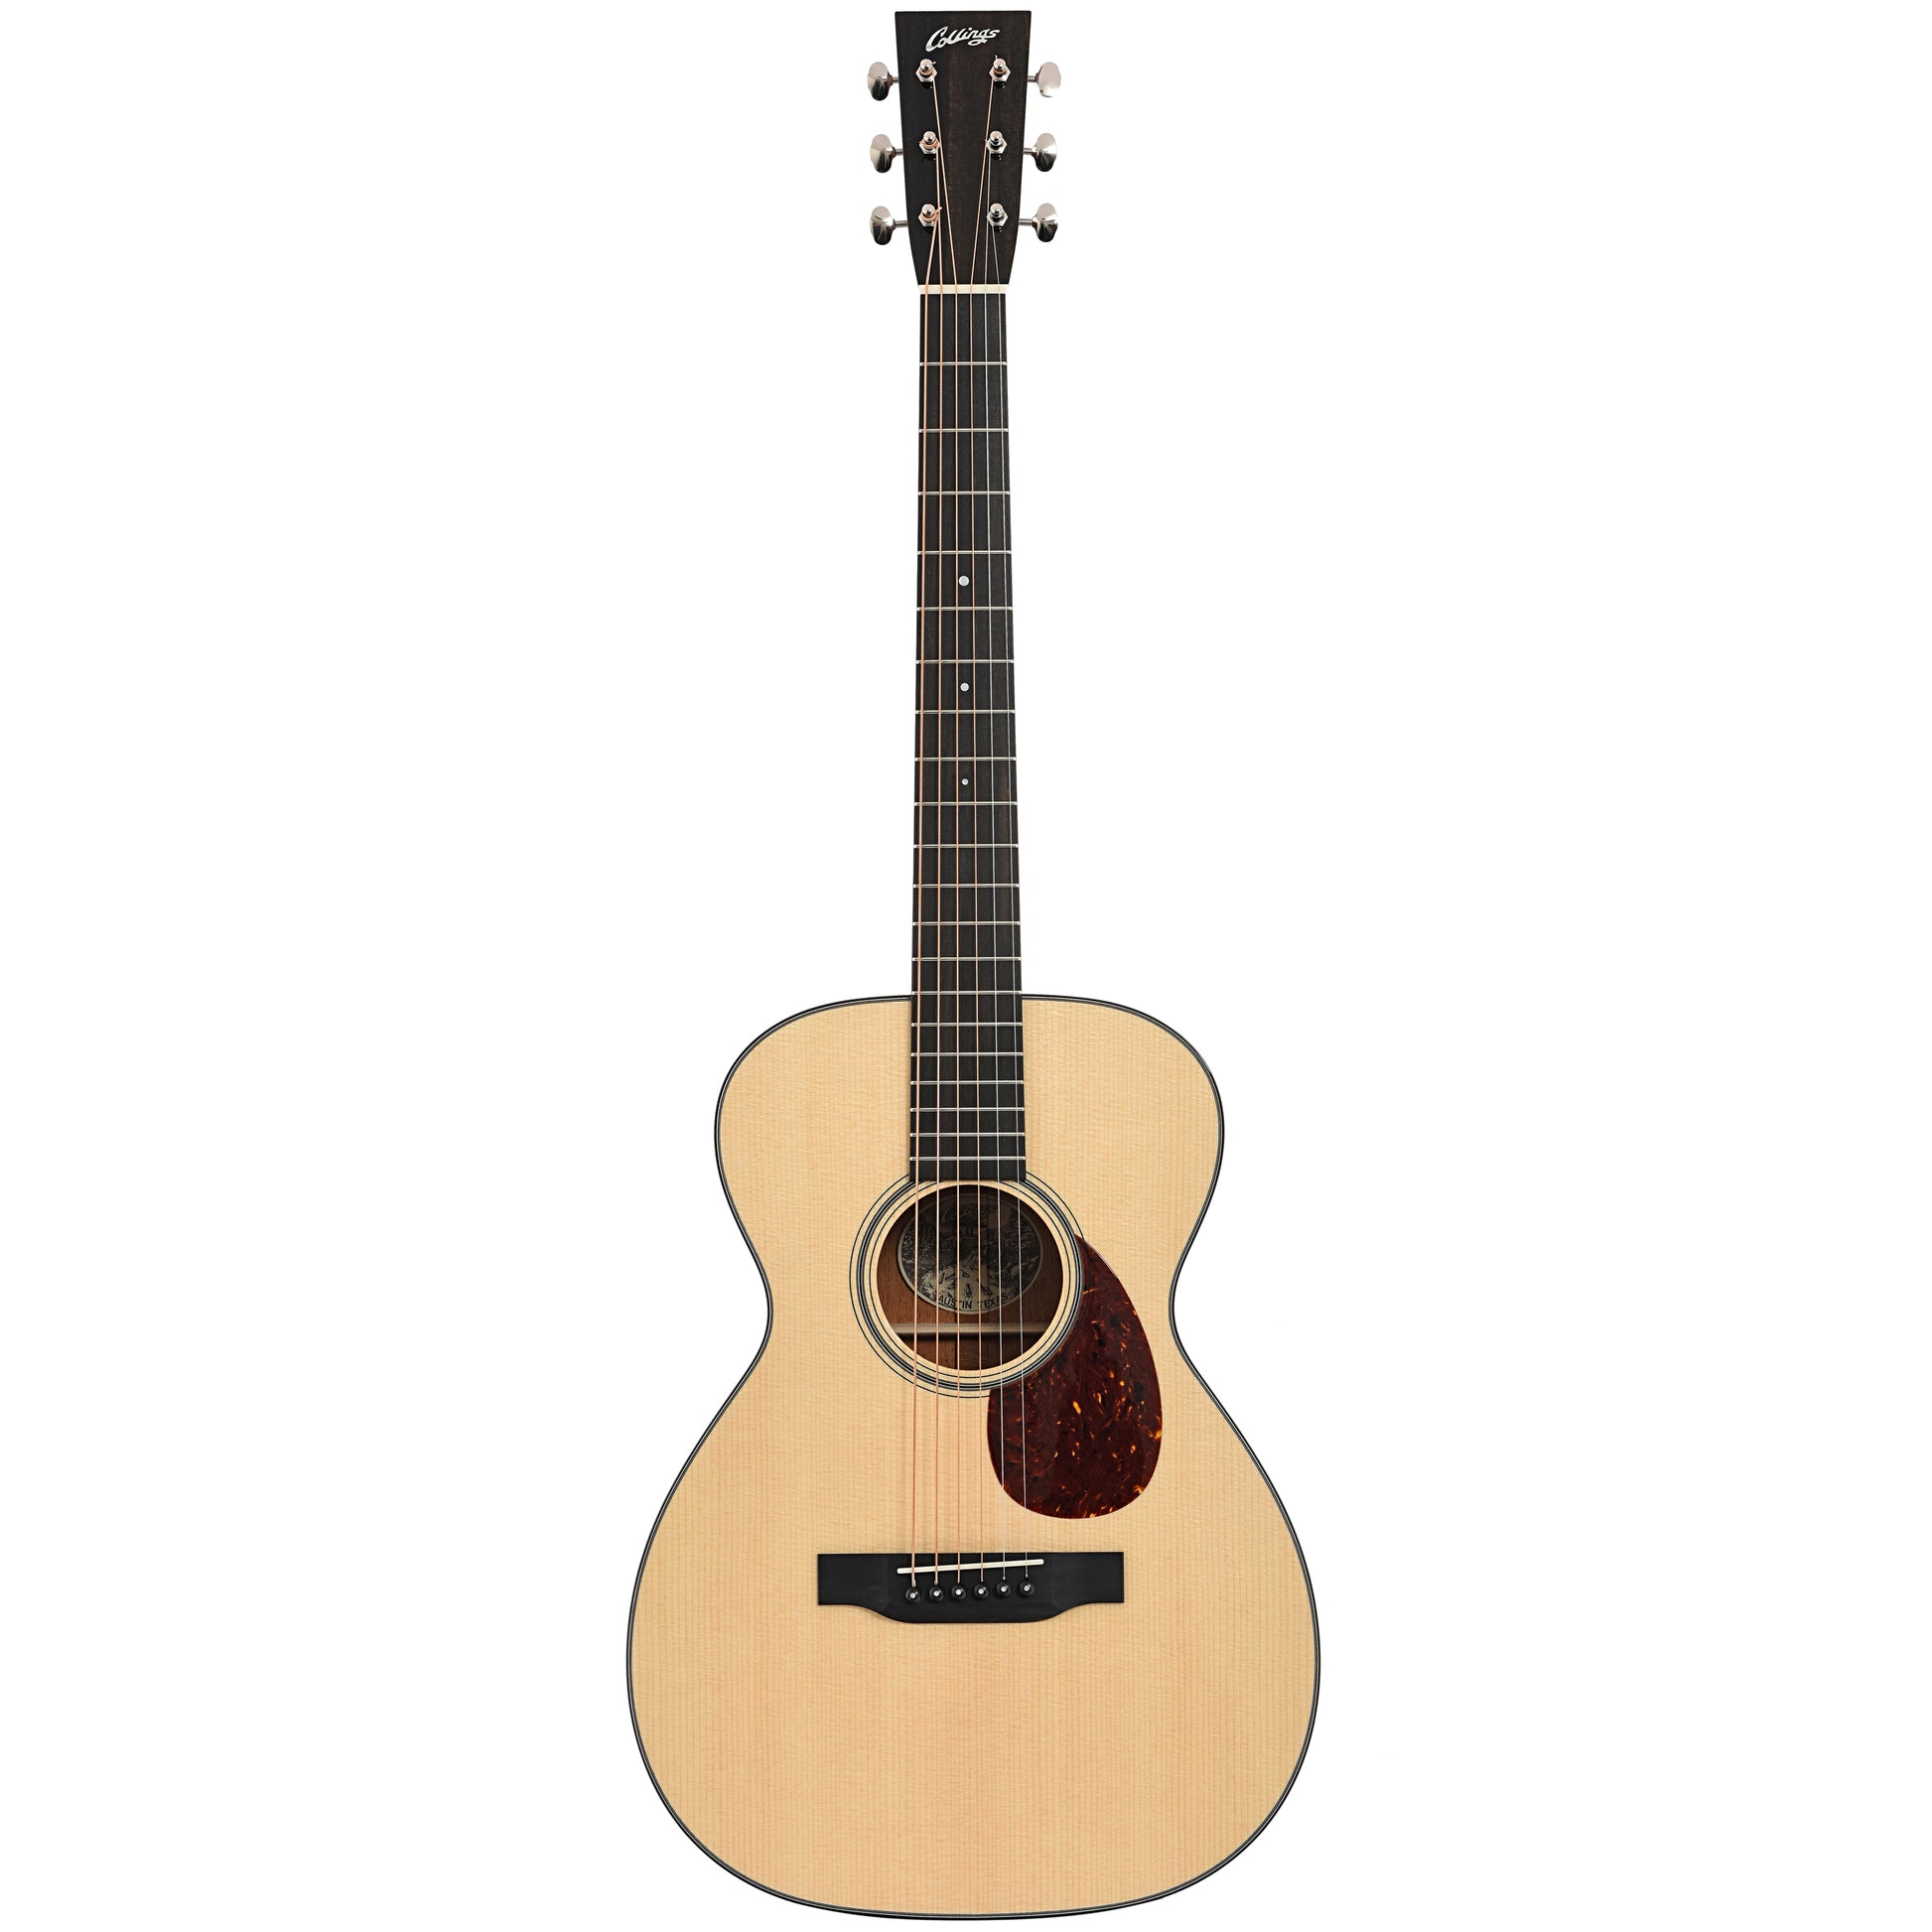 Full front of Collings 01 14-Fret Acoustic Guitar